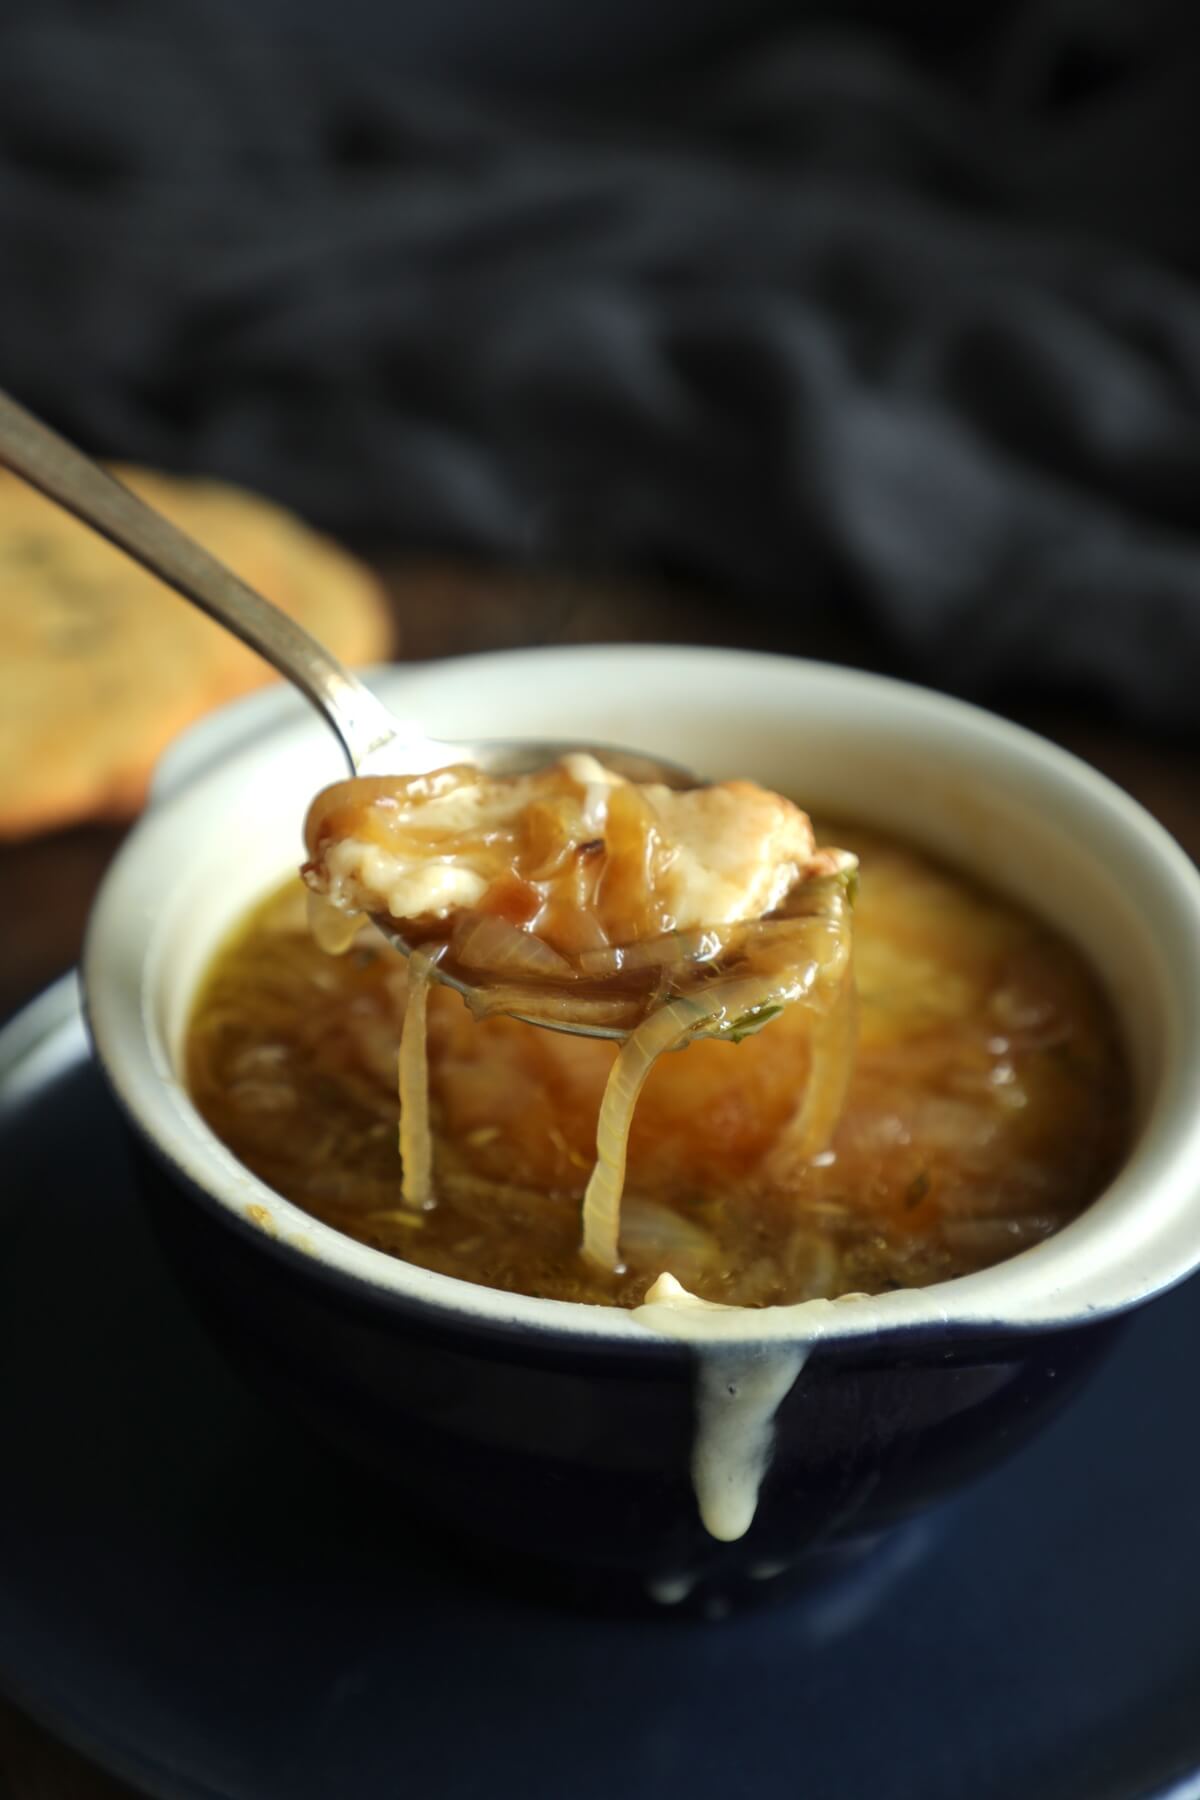 Spoonful of Keto French Onion Soup dripping with onions and cheese